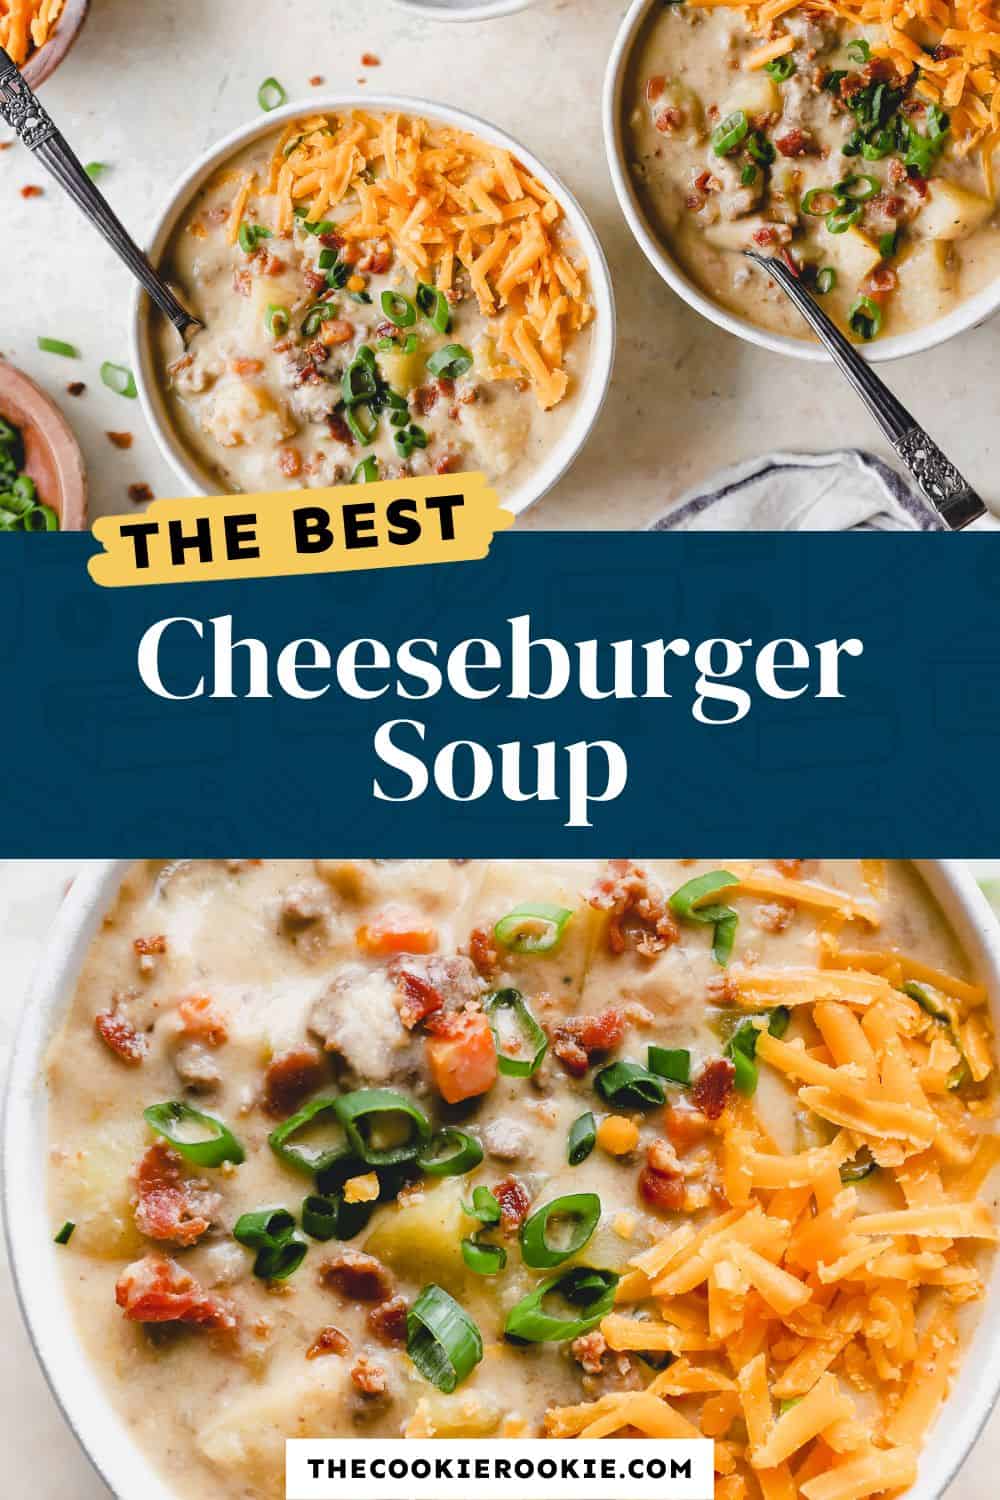 Cheeseburger Soup Recipe - The Cookie Rookie®